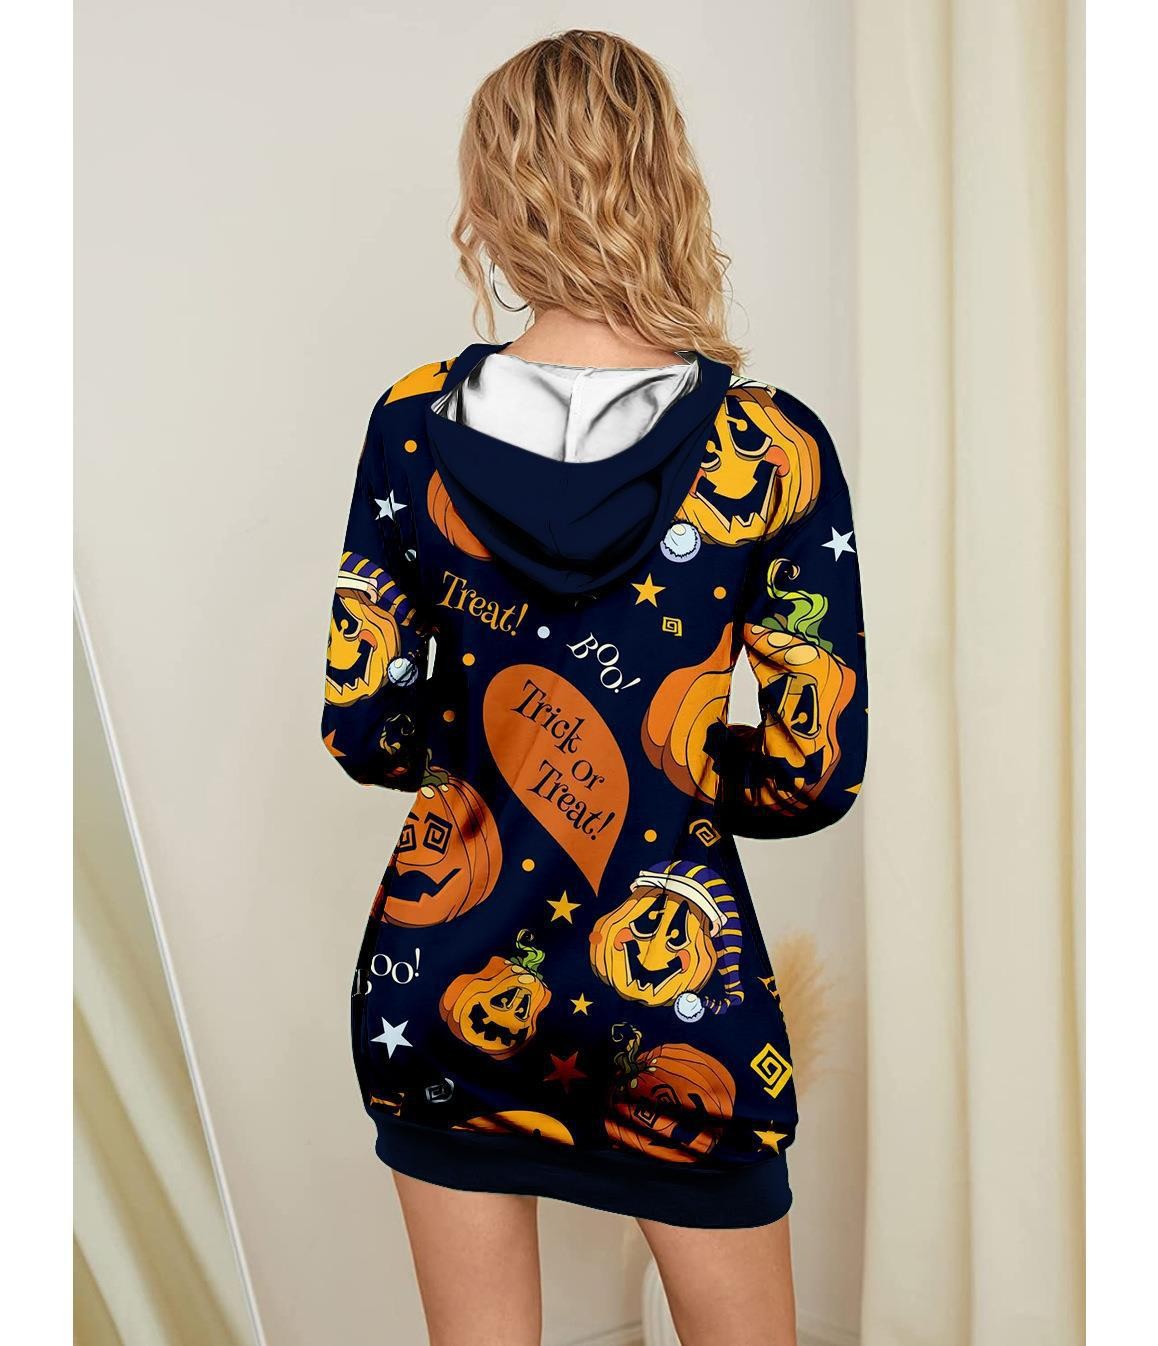 Halloween Pumpkin Design Pullover Hoodies for Women-Shirts & Tops-Free Shipping at meselling99